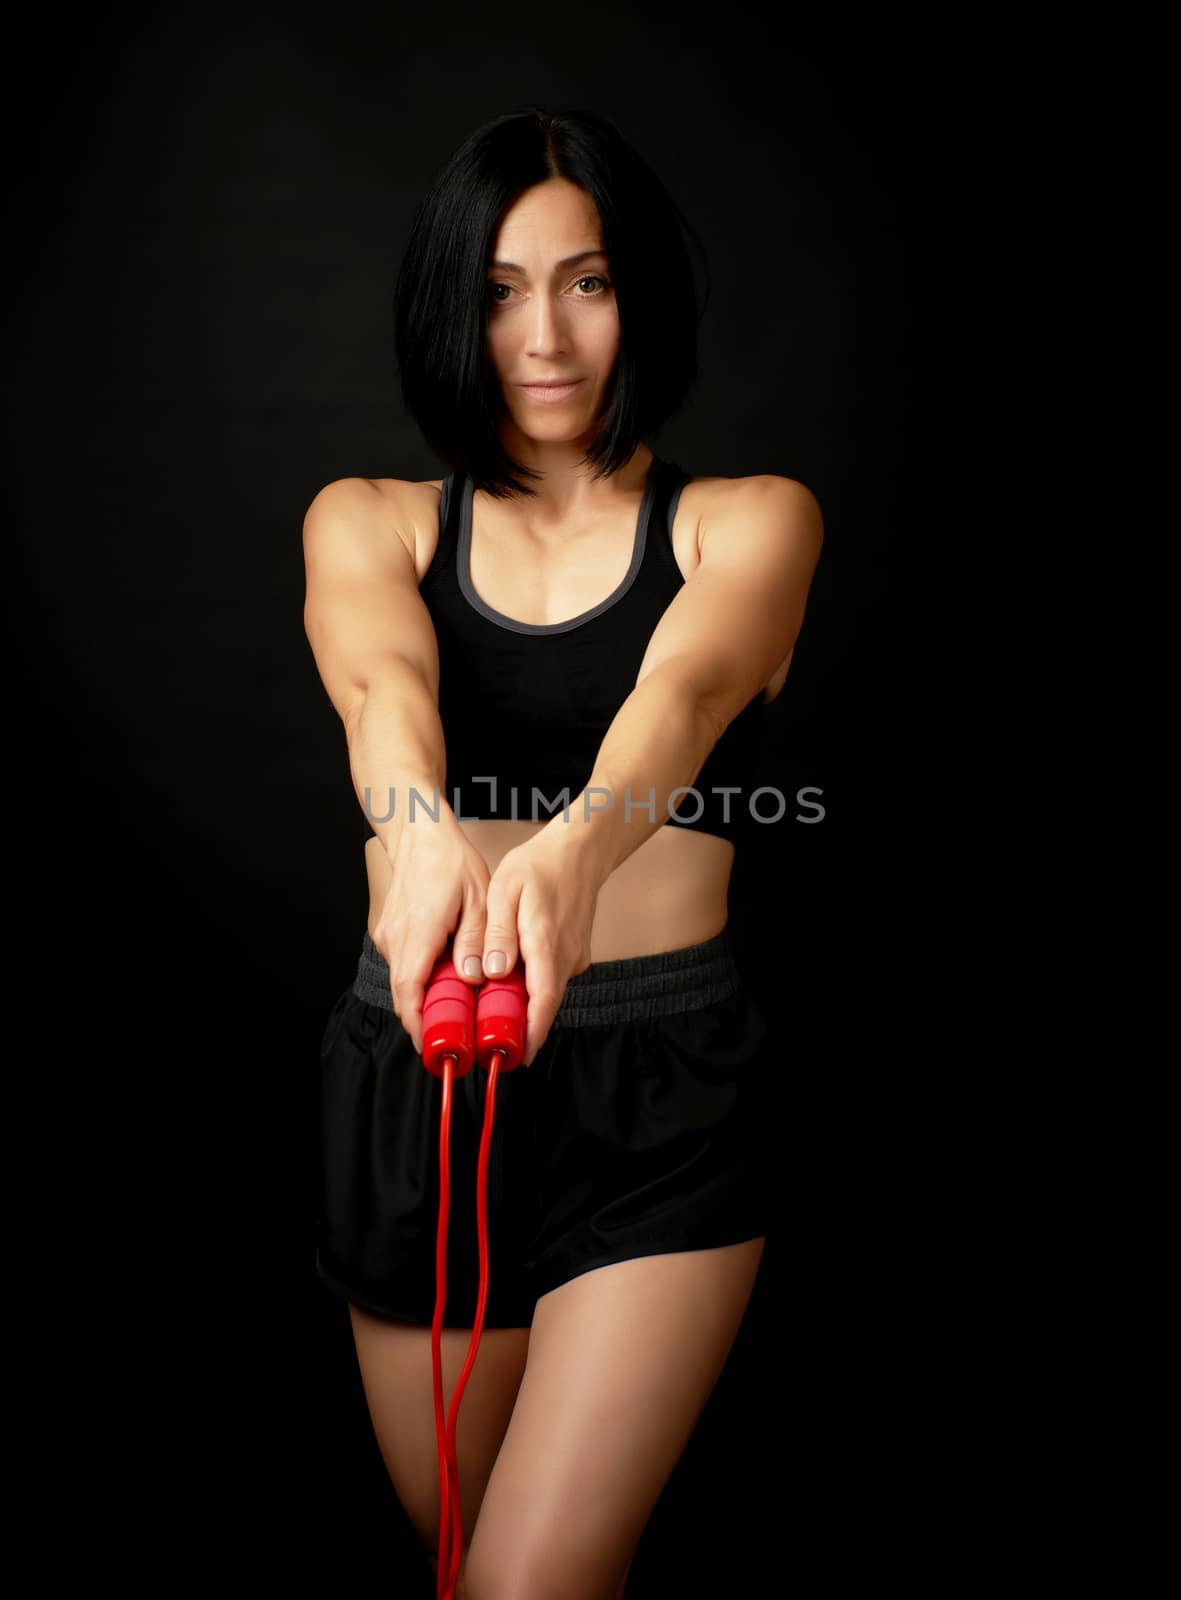 young woman with a sports figure in black uniform holds a red rope for jumping, low key